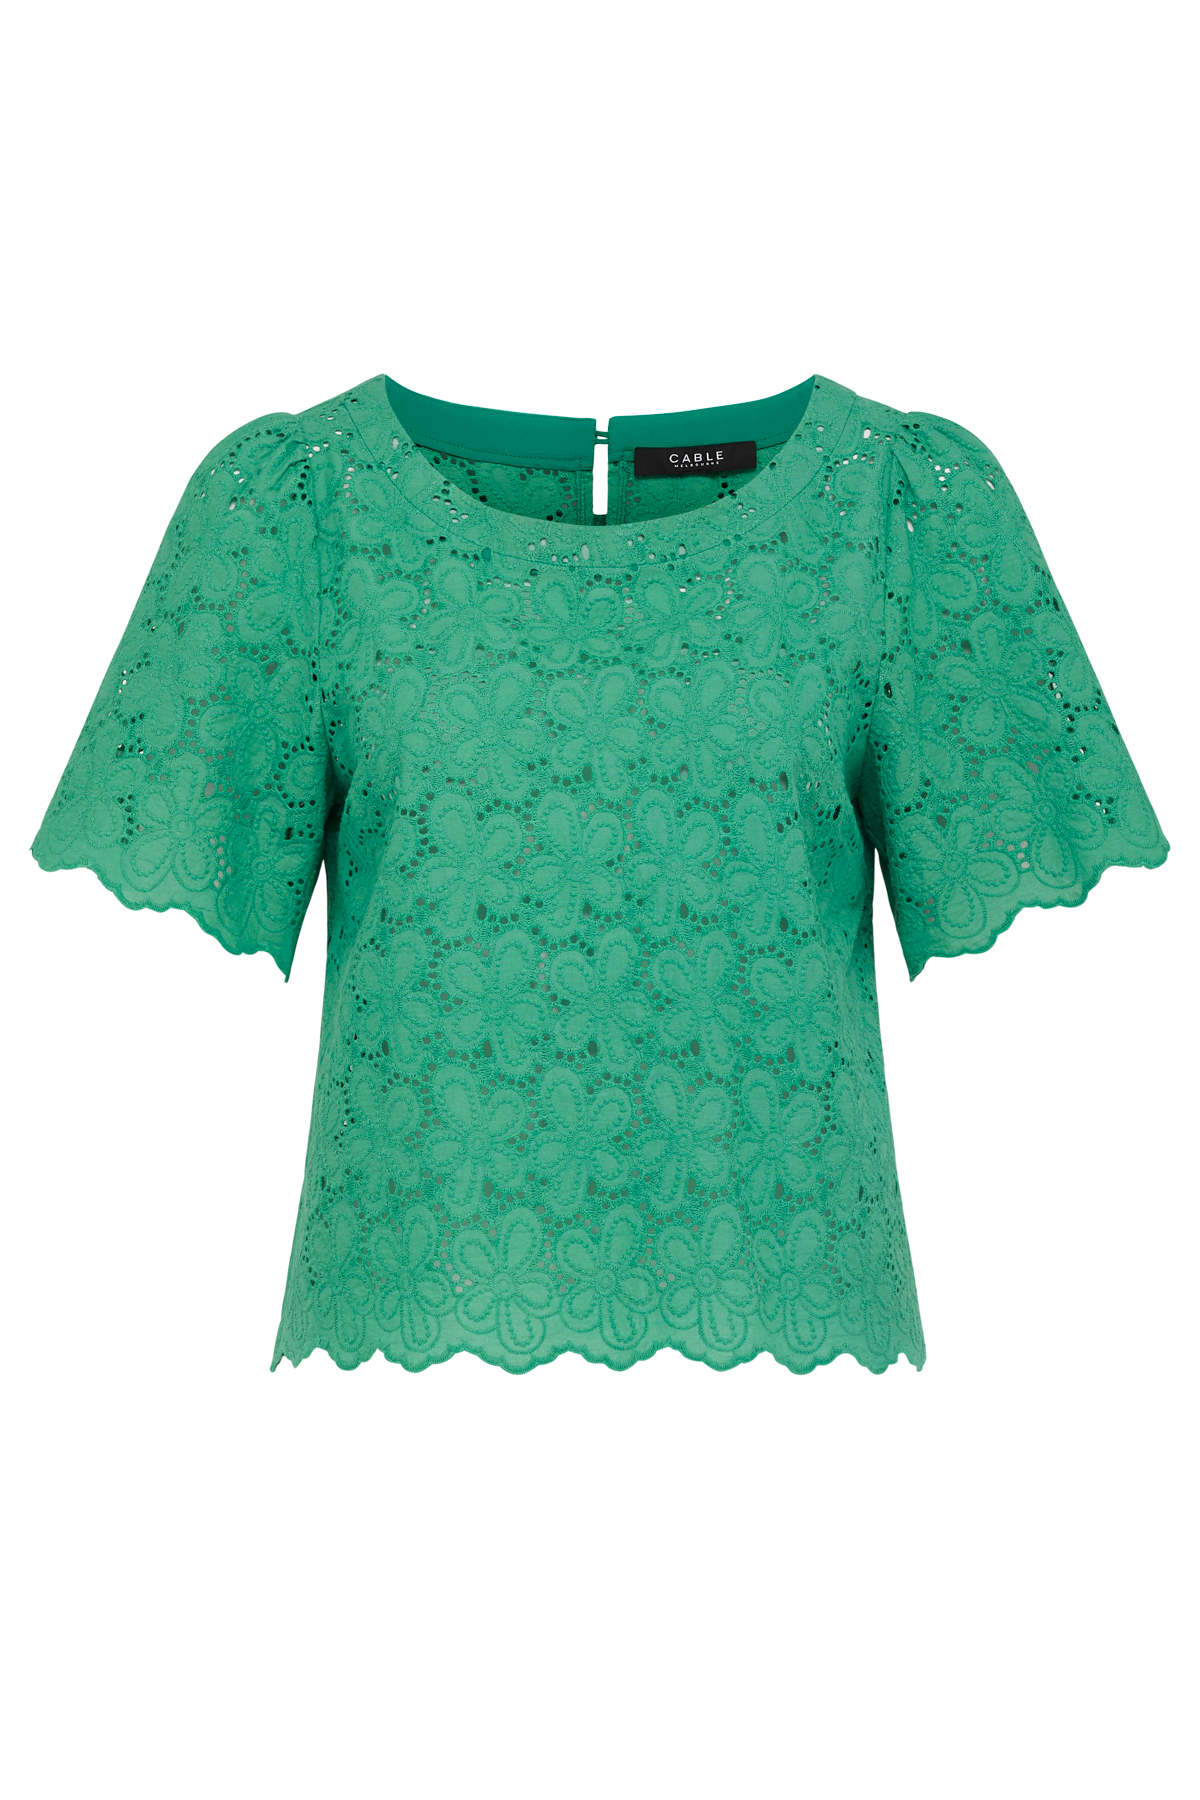 Byron Top - Green – Cable Melbourne